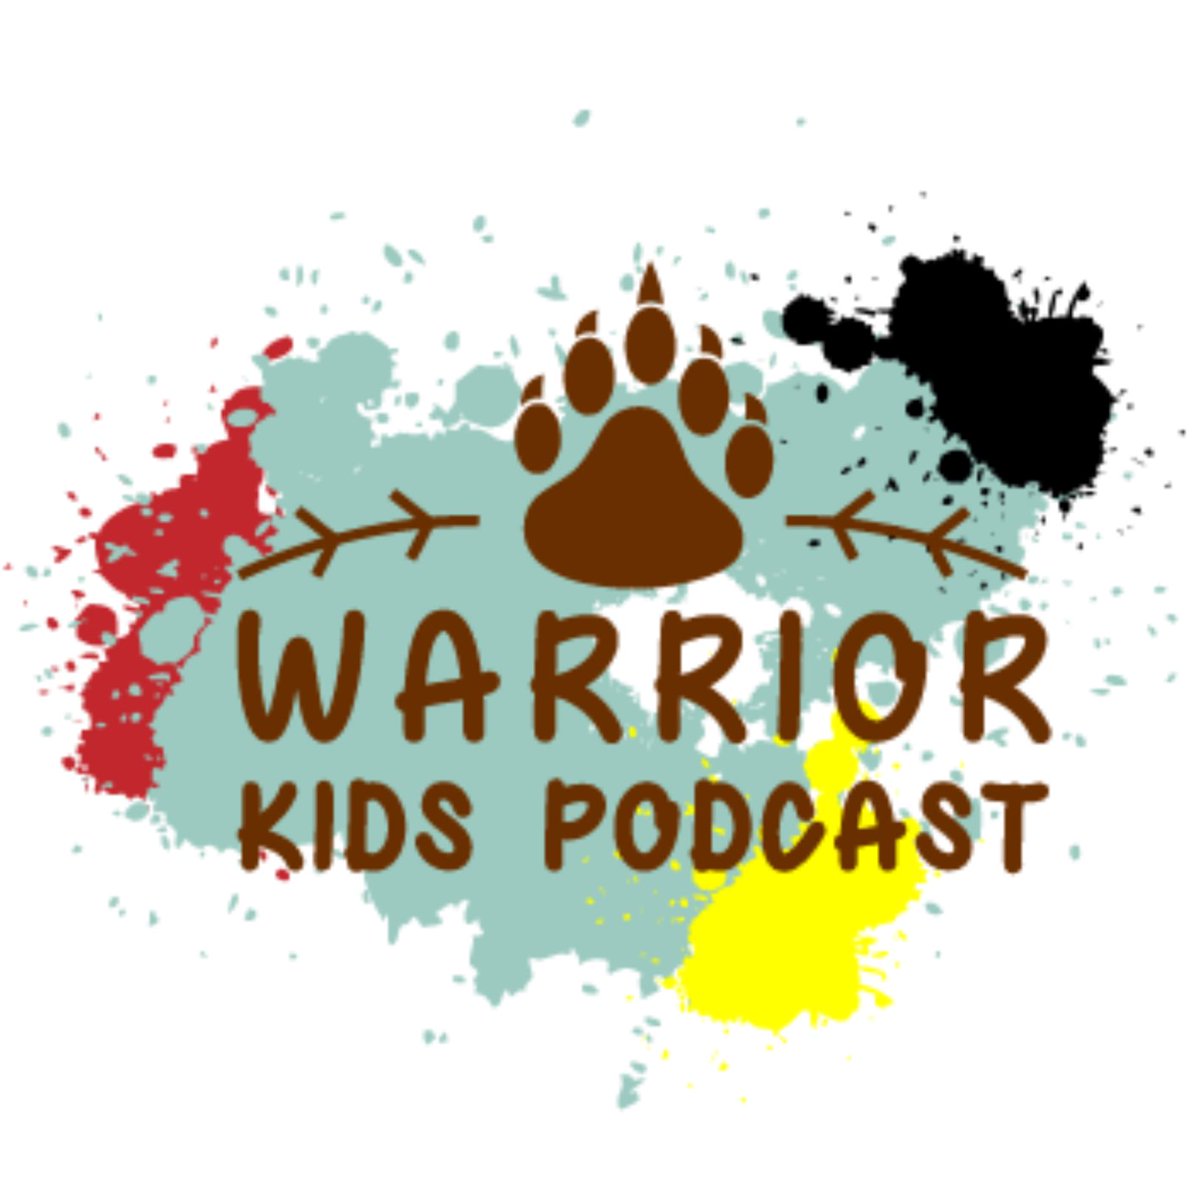 #WarriorKidsPodcast is another great family podcast that celebrates everything #Indigenous and inspire kids of all backgrounds to be warriors for social and earth justice. Check it out on #KidsListen or wherever you get your podcasts! #NativeAmericanHeritageMonth